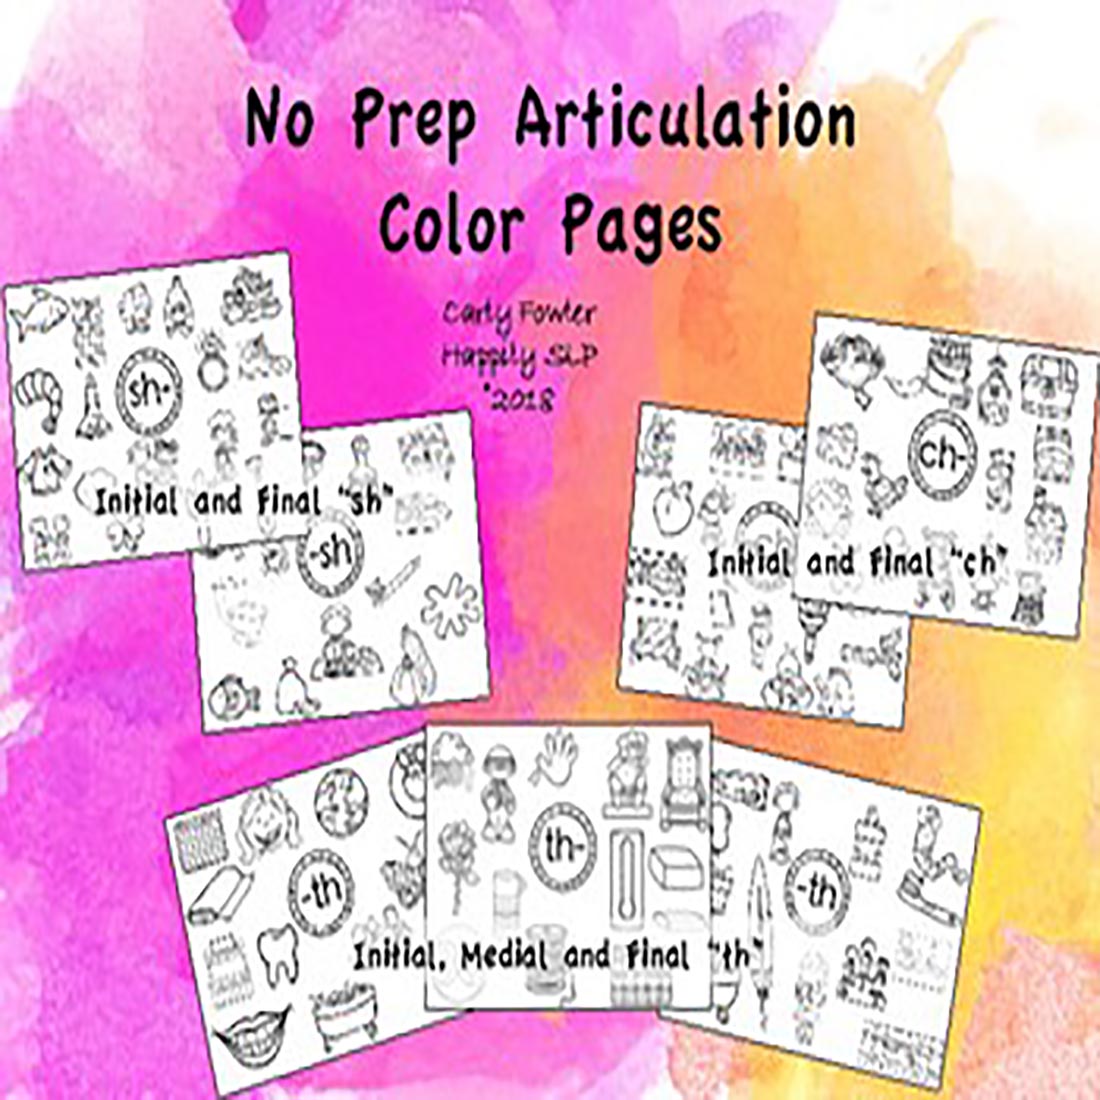 No Prep Articulation Coloring Pages for "sh" "ch" and "th" preview image.